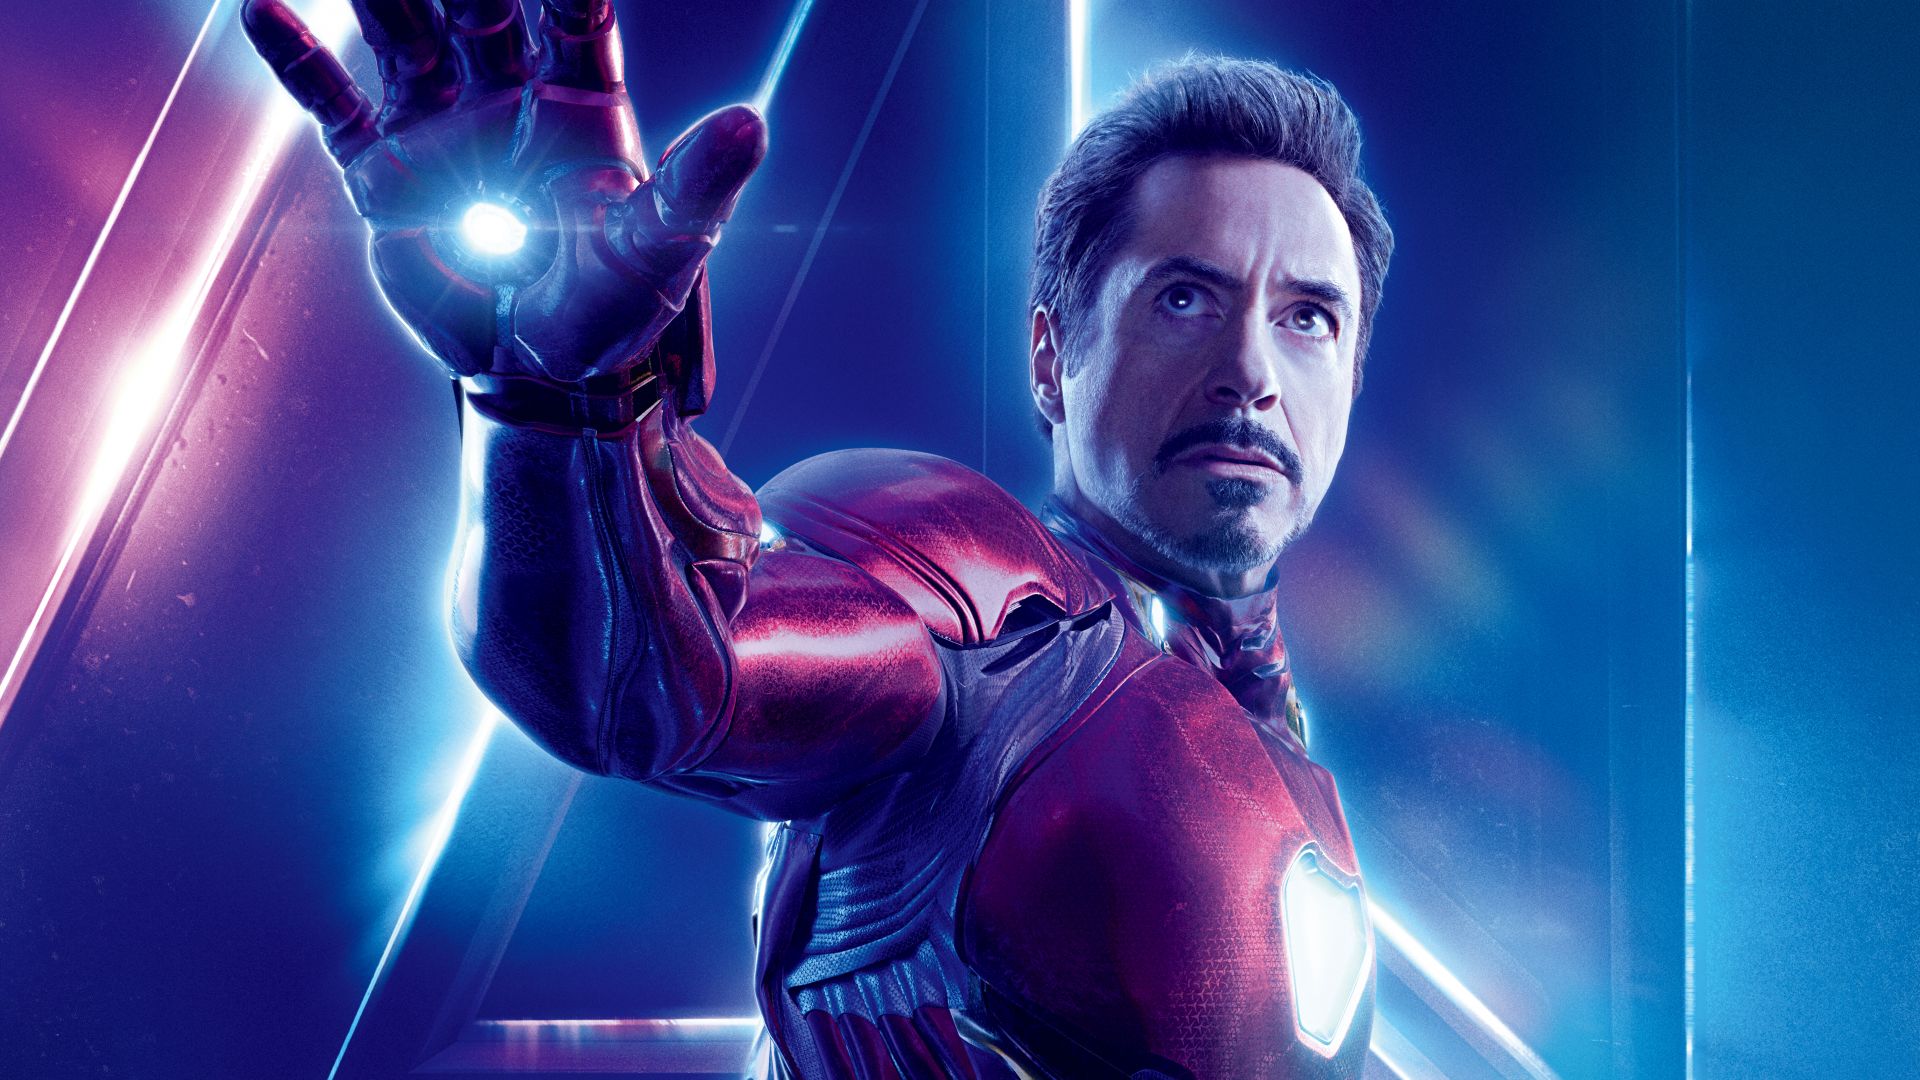 Uunfortunately, fans might be upset to know that Avengers: Endgame might be Downey's last Marvel movie. According to a new report, that will be the case.